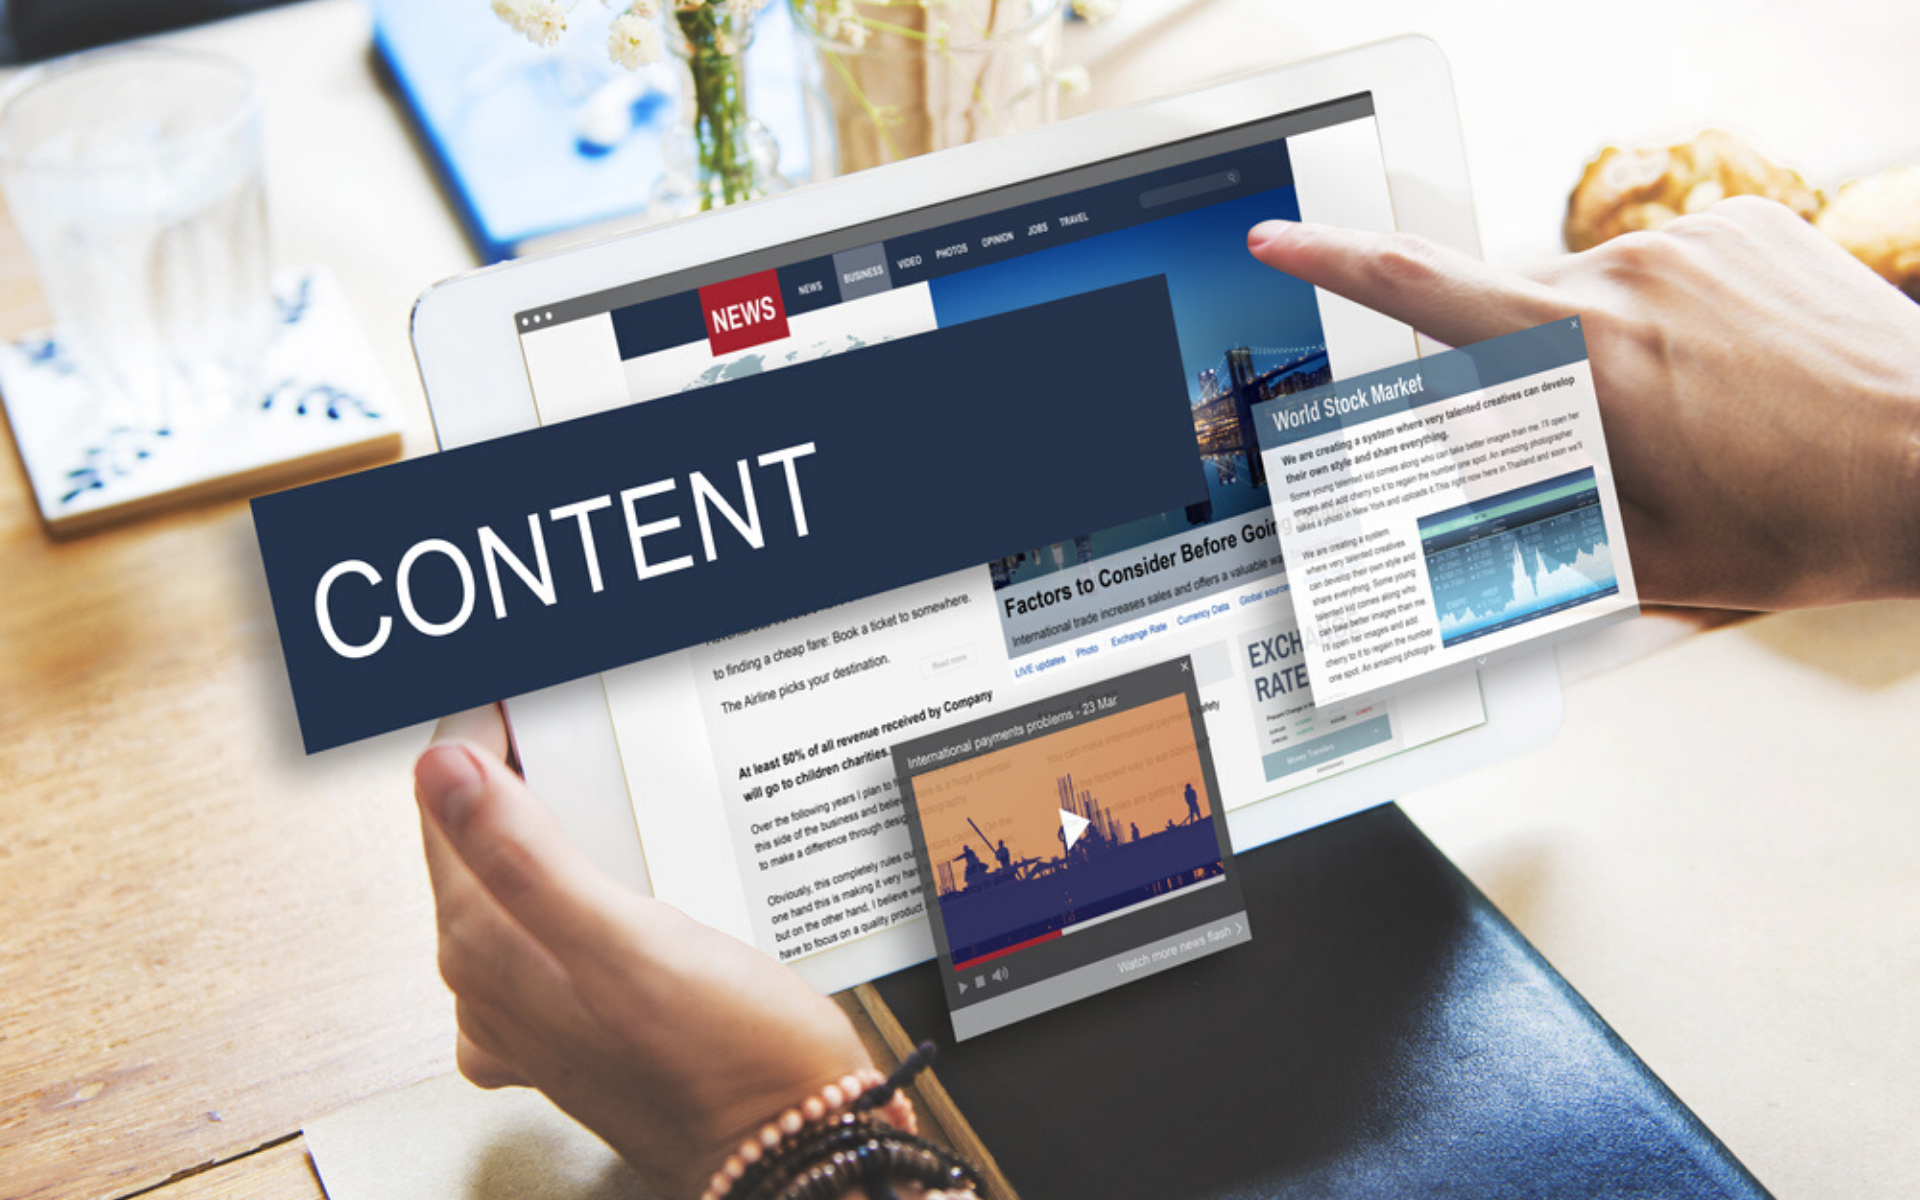 content-marketing-tips